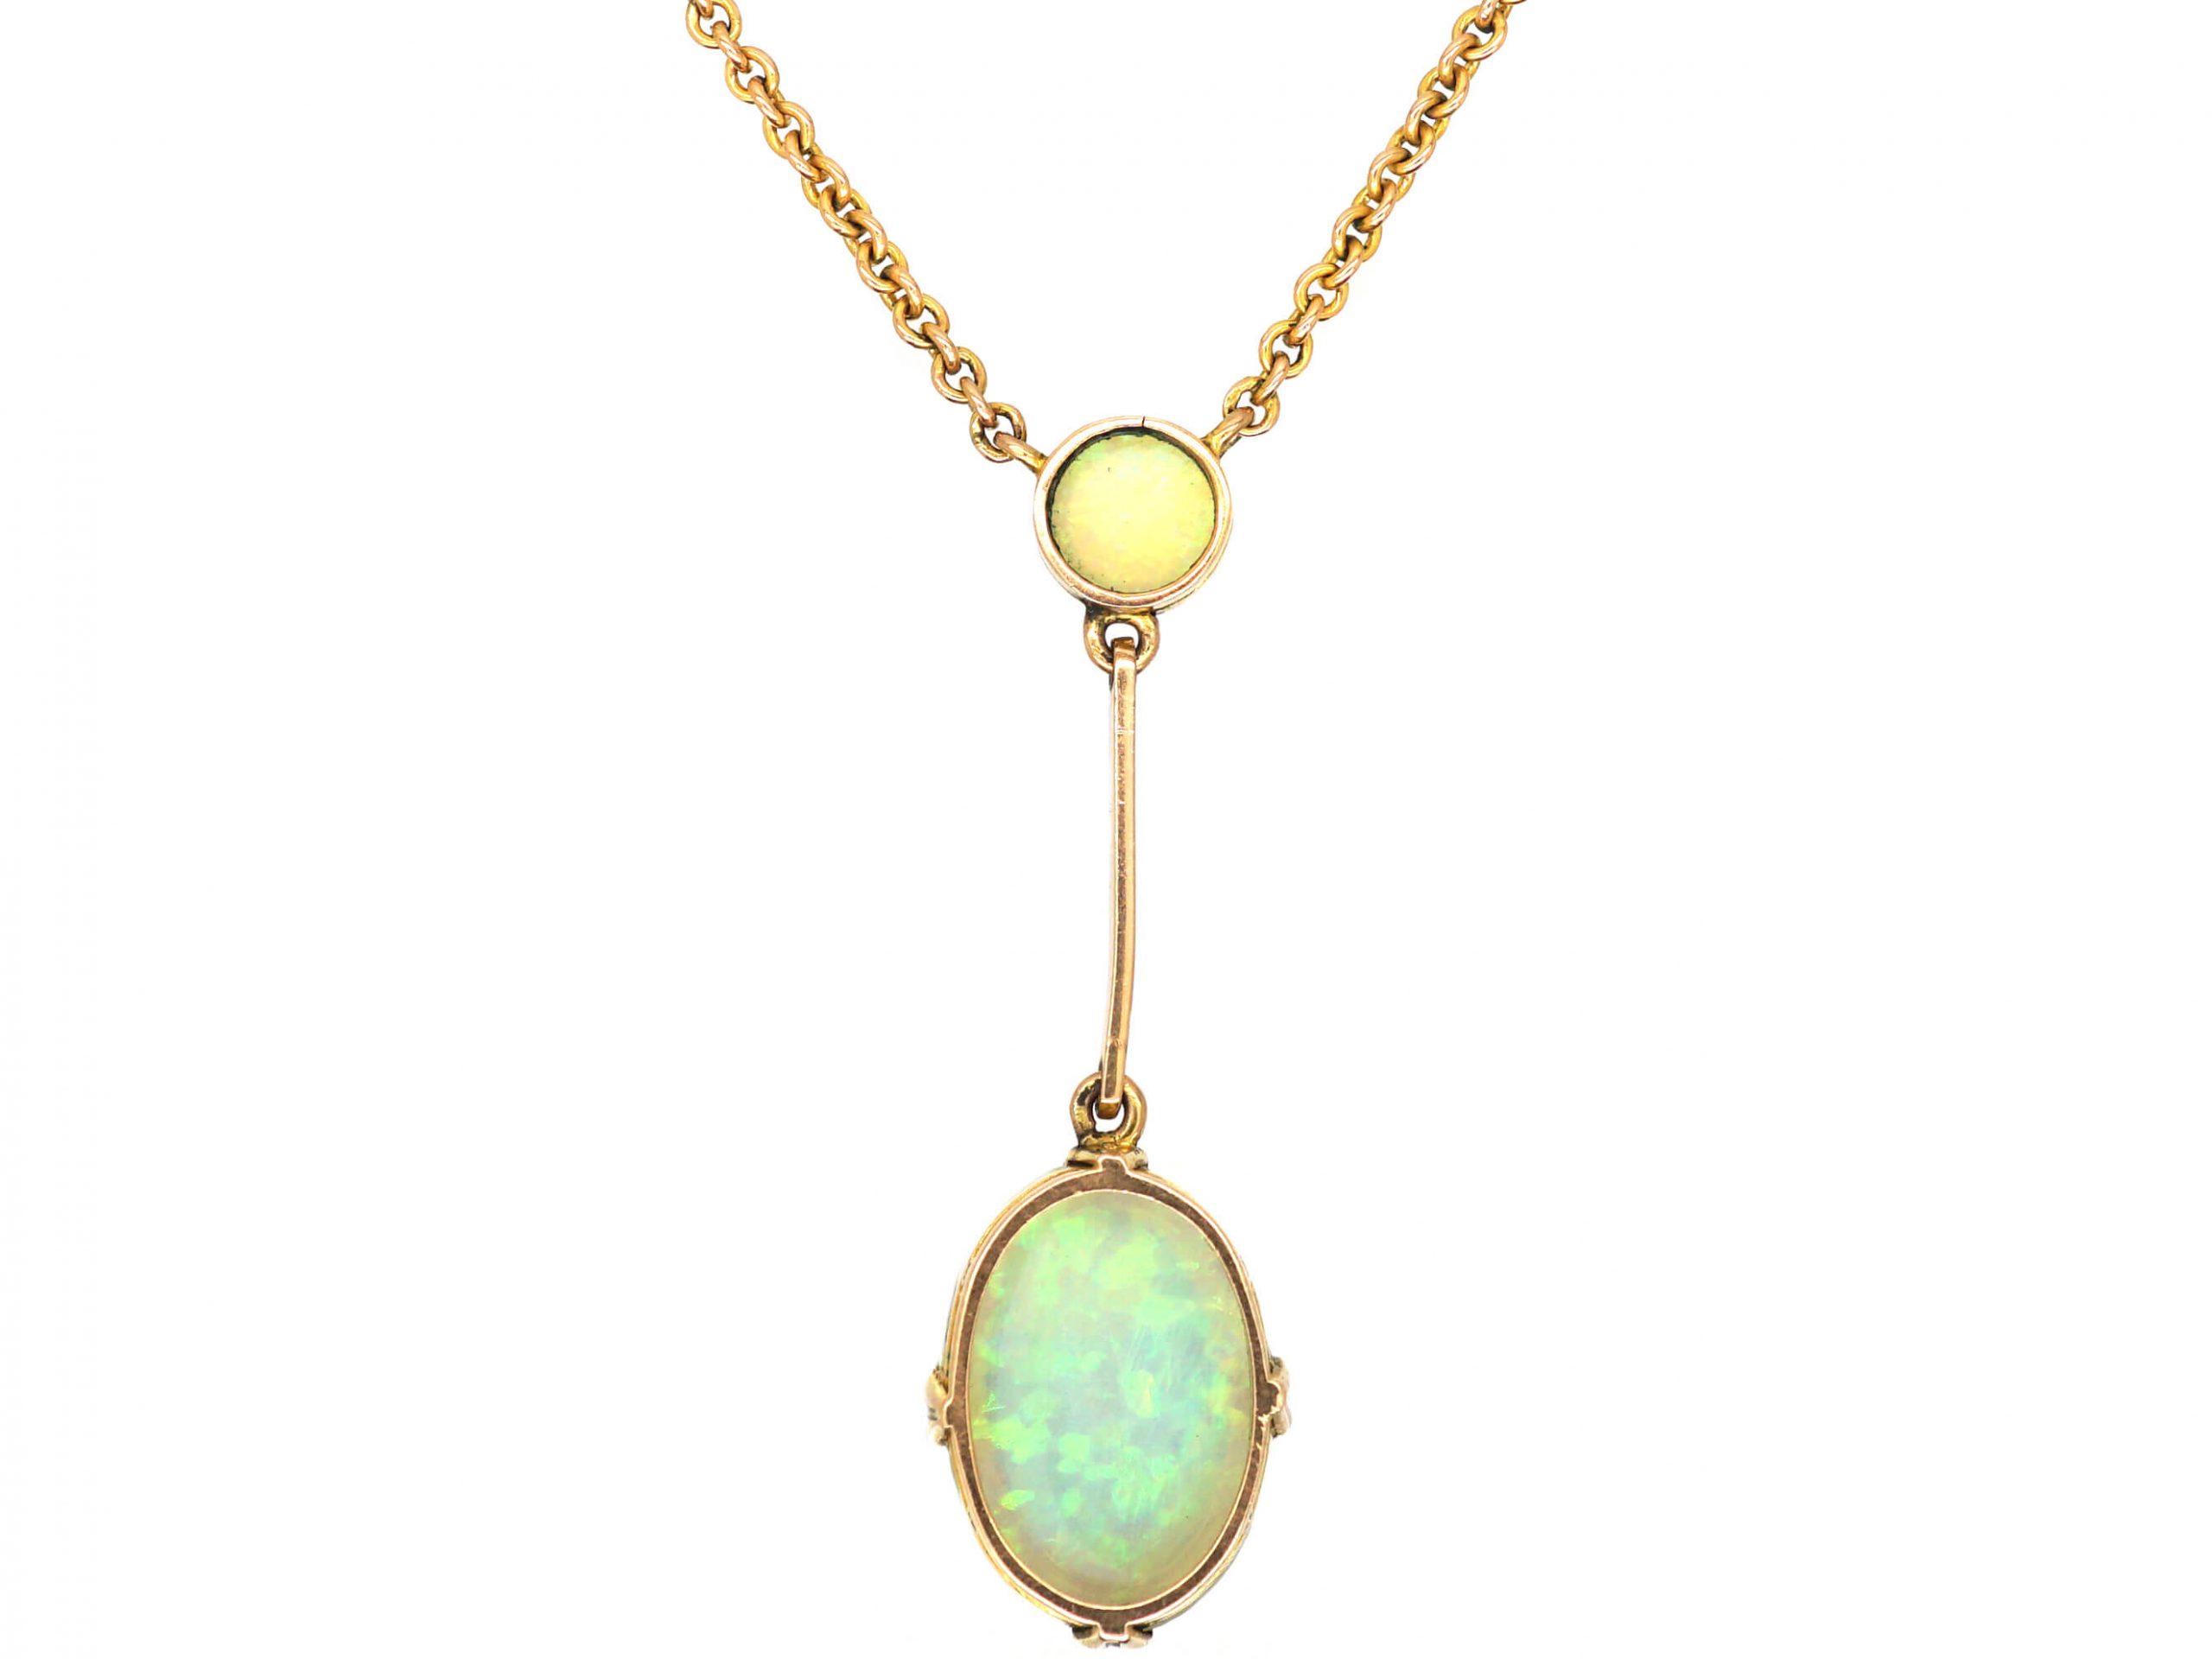 Edwardian 9ct Gold Two Stone Opal Drop Necklace (429W) | The Antique ...